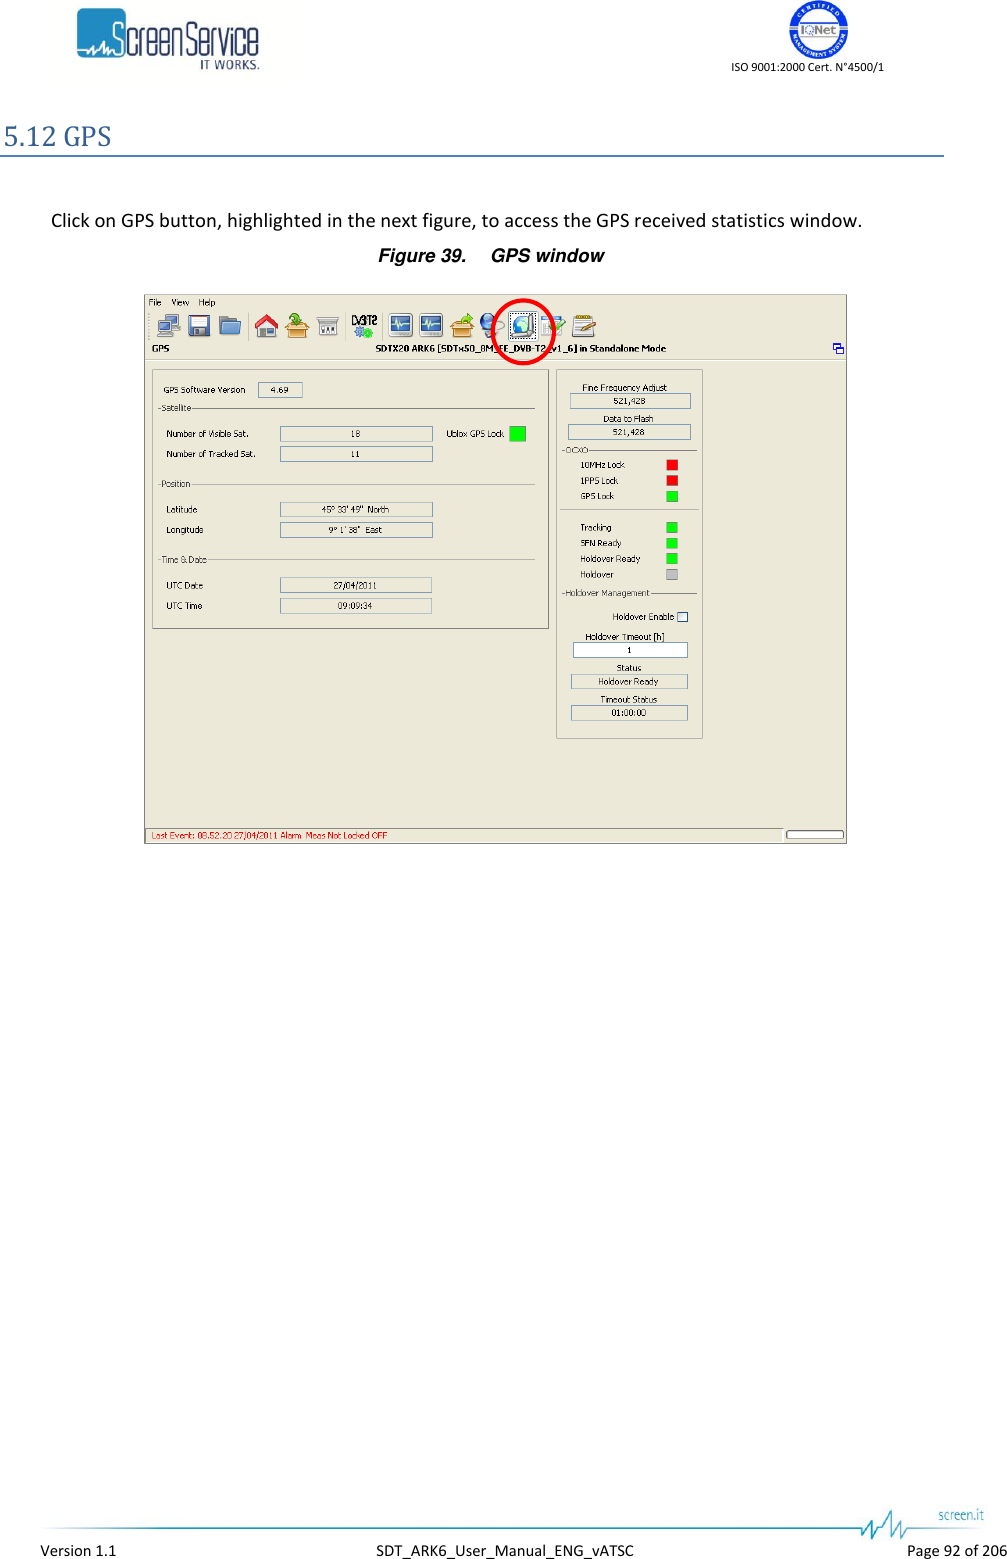    ISO 9001:2000 Cert. N°4500/1   Version 1.1  SDT_ARK6_User_Manual_ENG_vATSC  Page 92 of 206 5.12 GPS  Click on GPS button, highlighted in the next figure, to access the GPS received statistics window. Figure 39. GPS window  